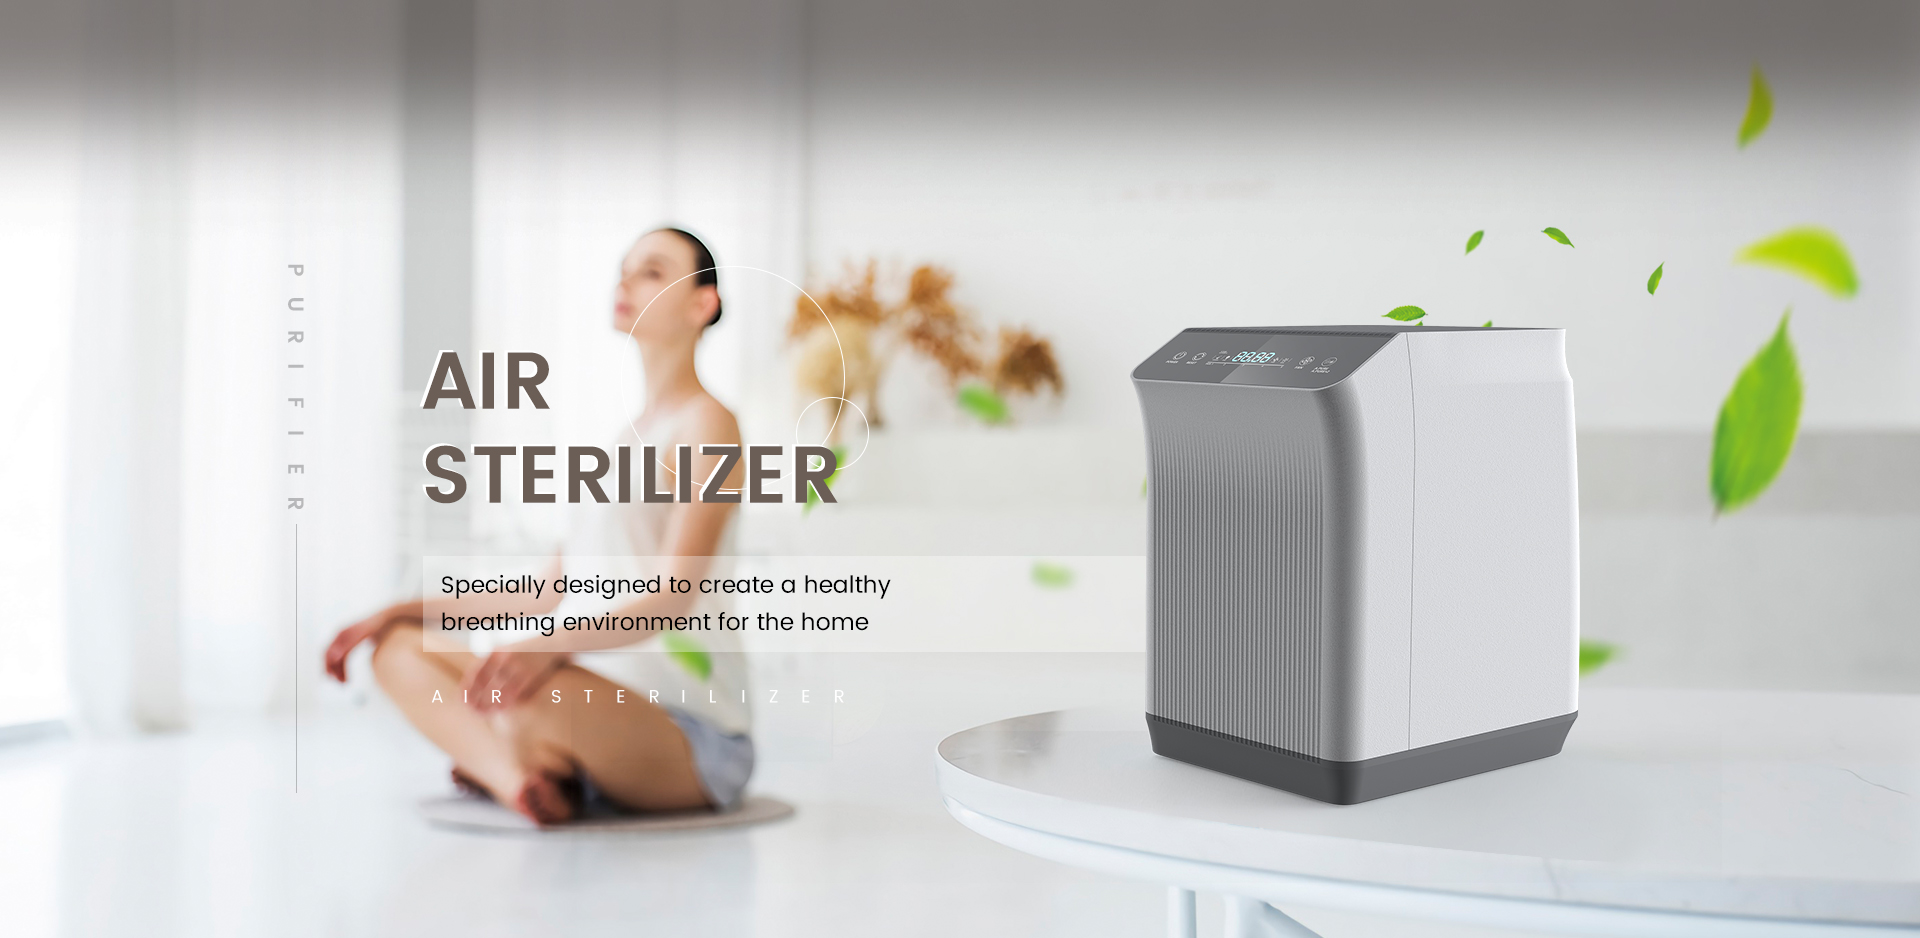 Mycoplasma virus and air purifiers: The key to protecting the indoor environment